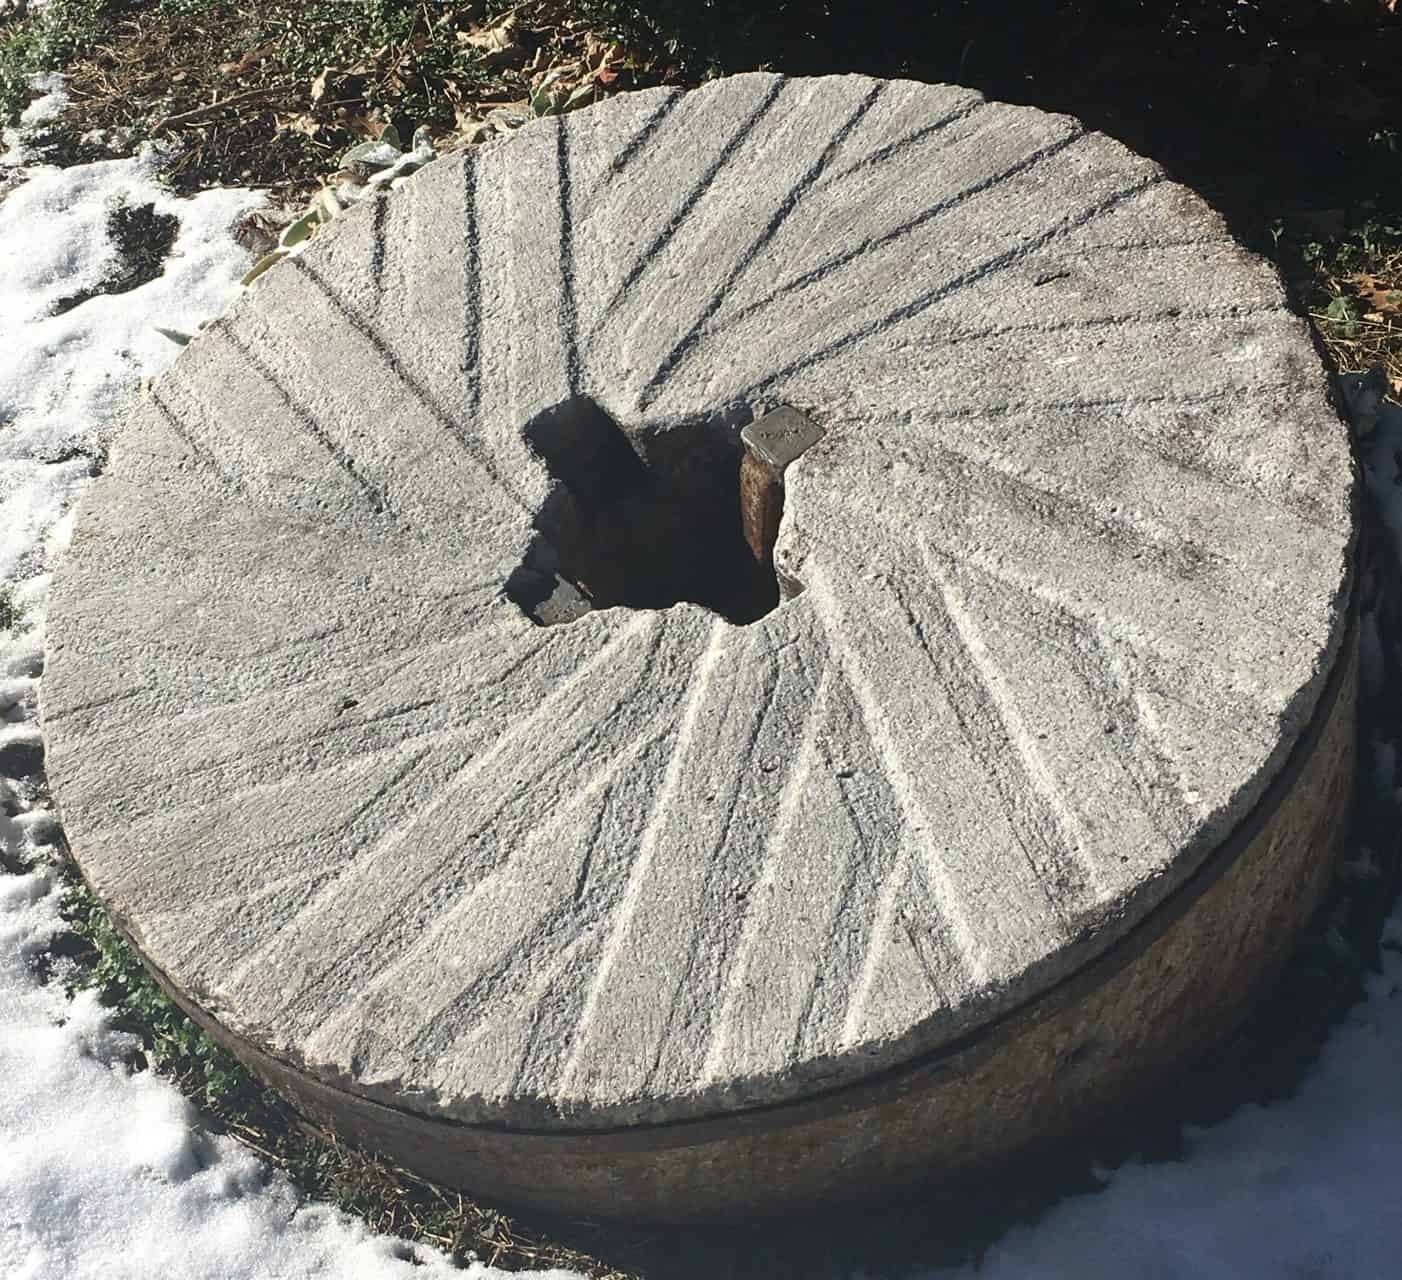 Upper stone from pair of millstones used at the Irvin Huff Mill.>